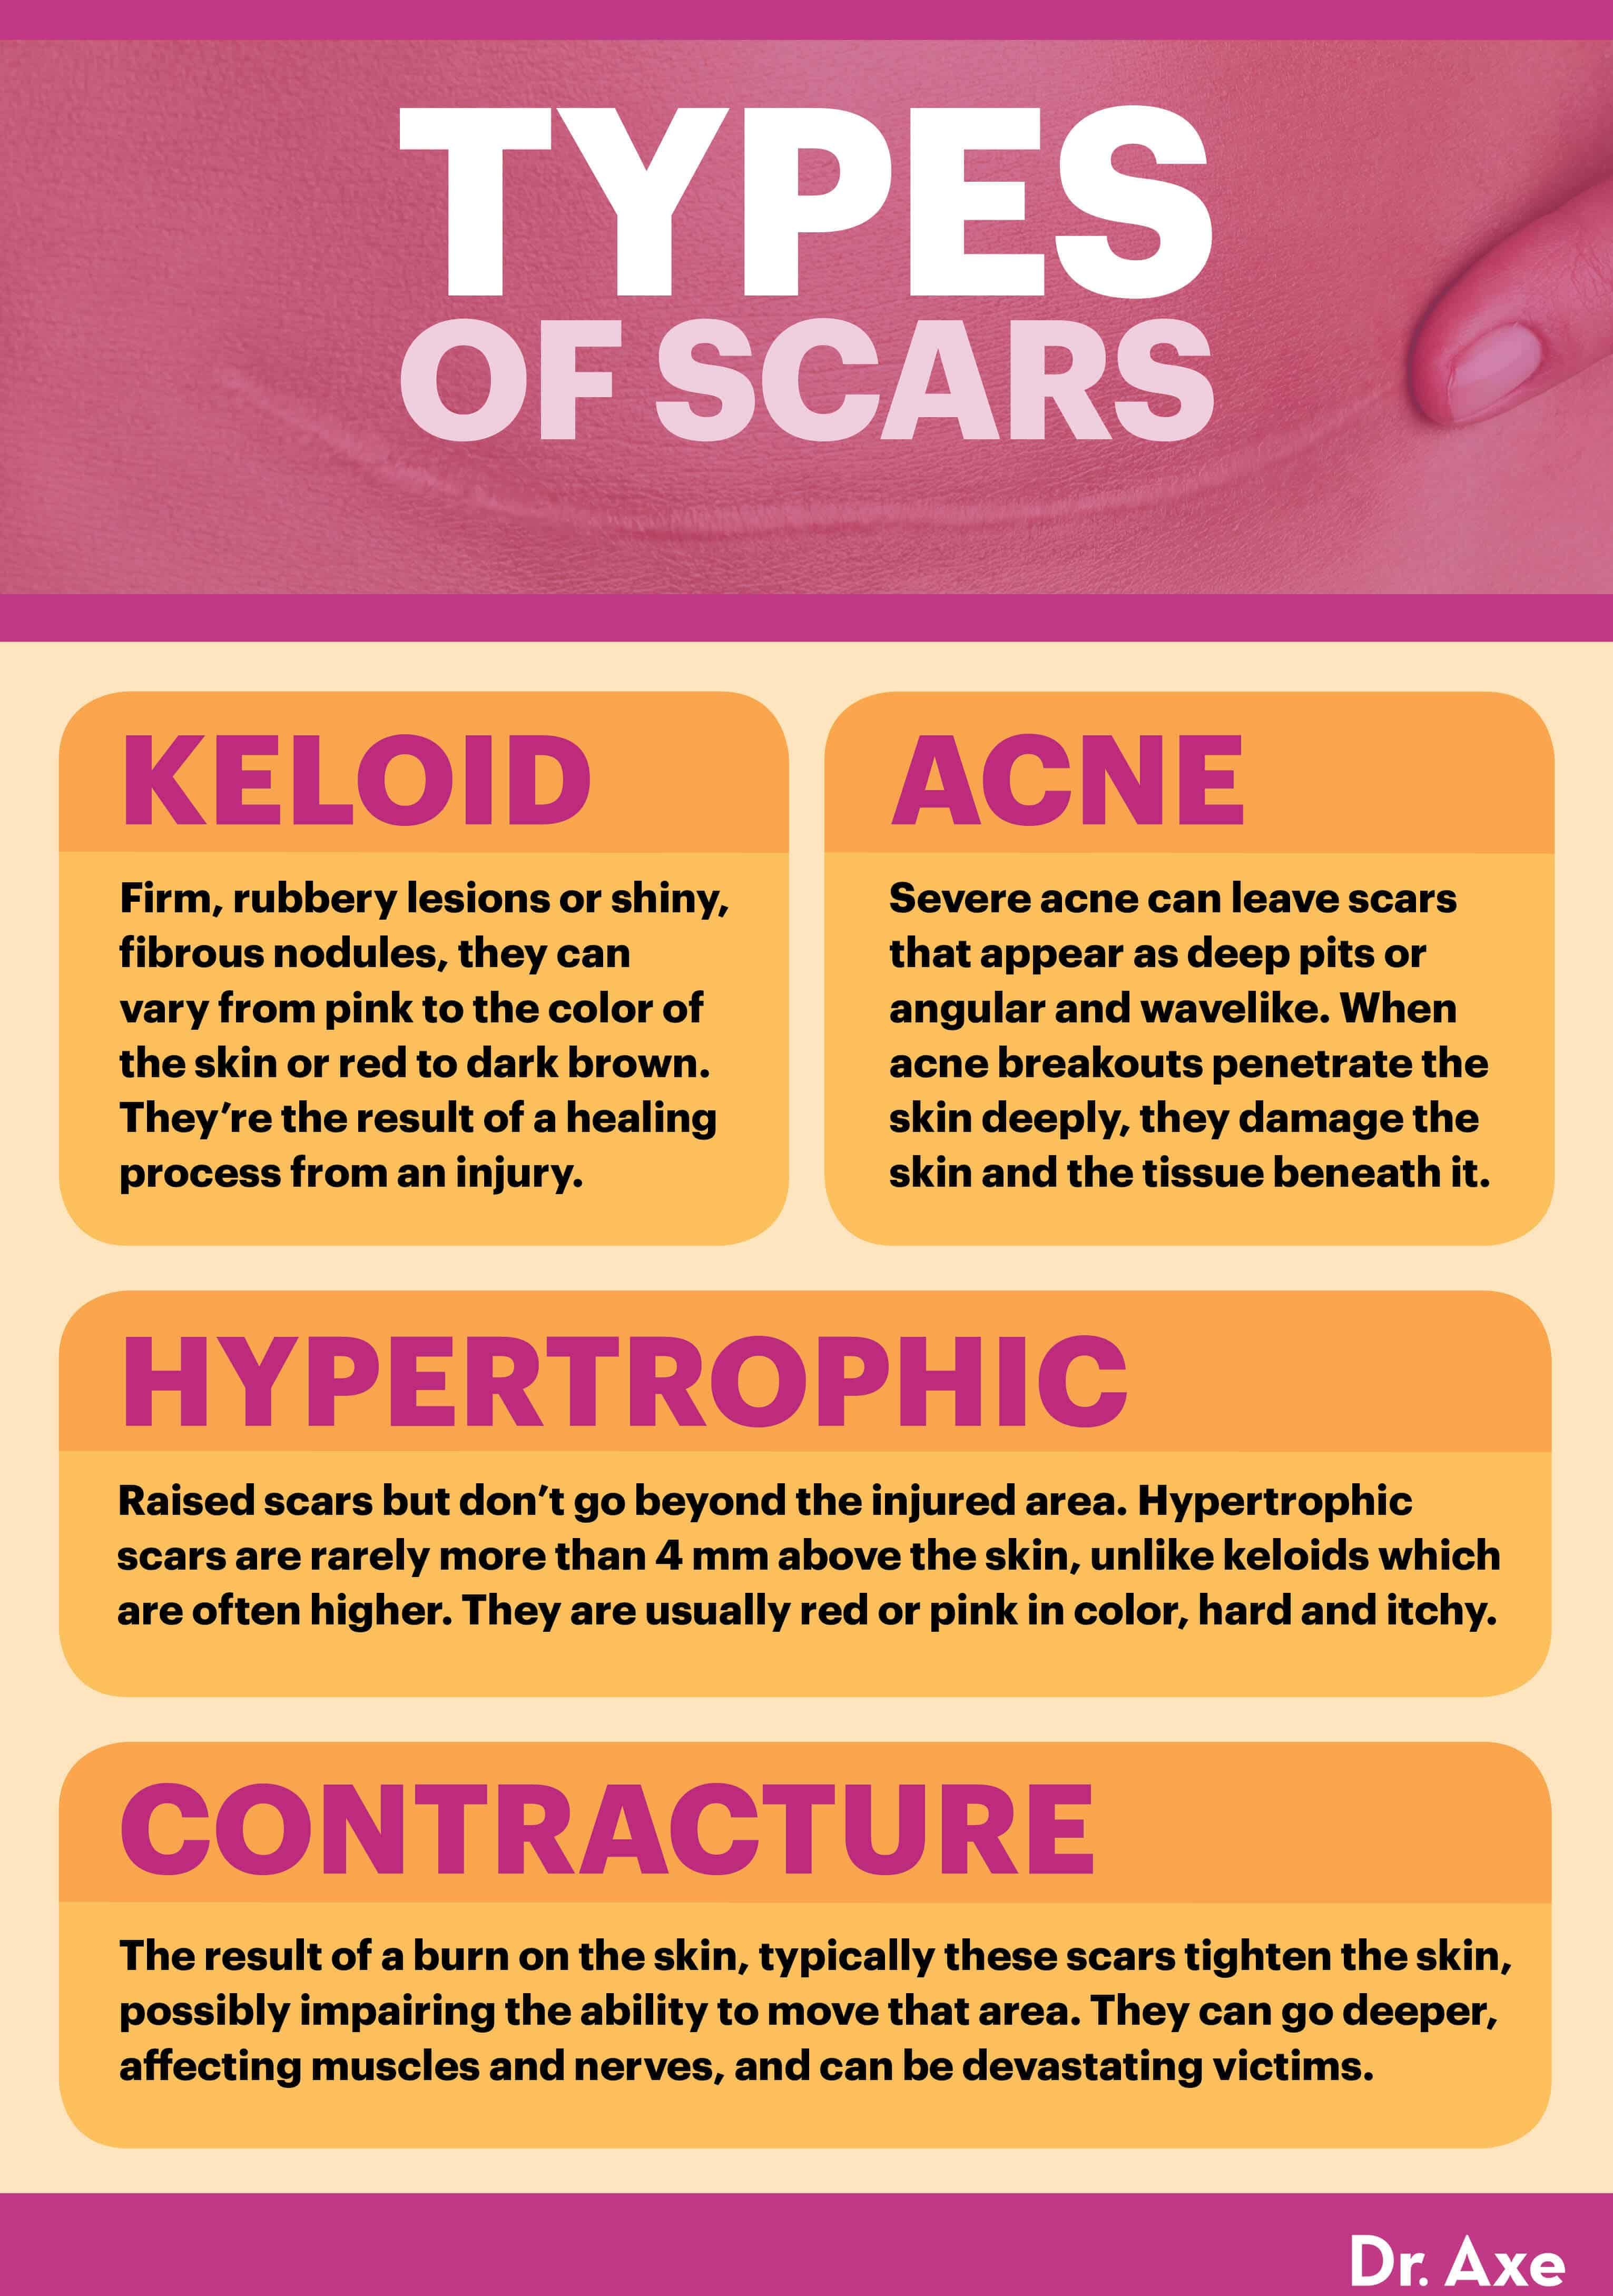 Types of scars - Dr. Axe